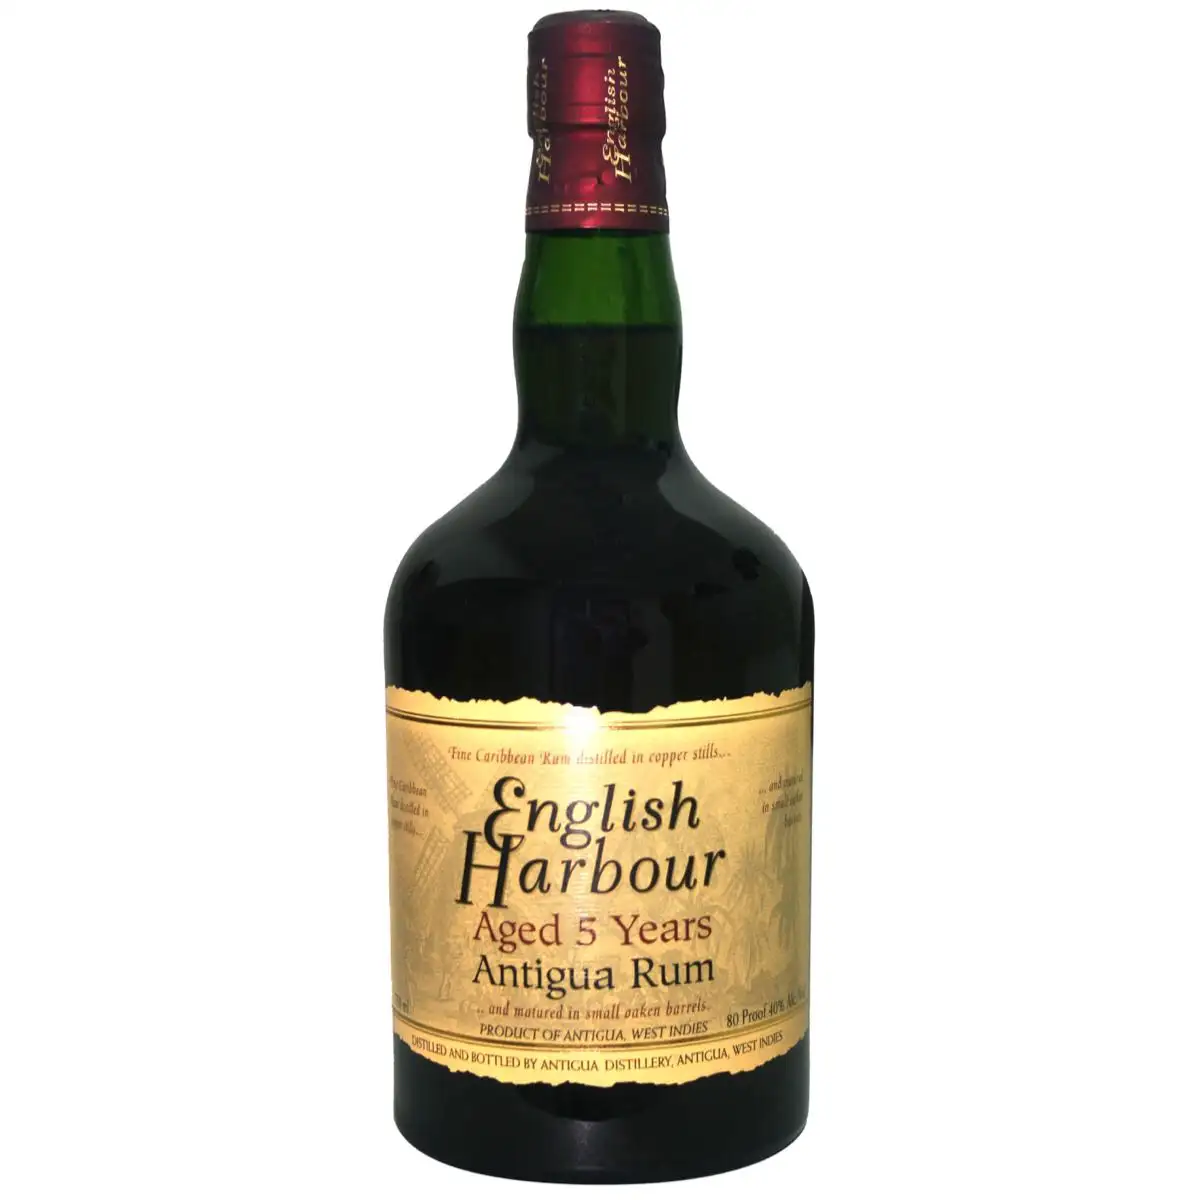 Image of the front of the bottle of the rum English Harbour 5 Years